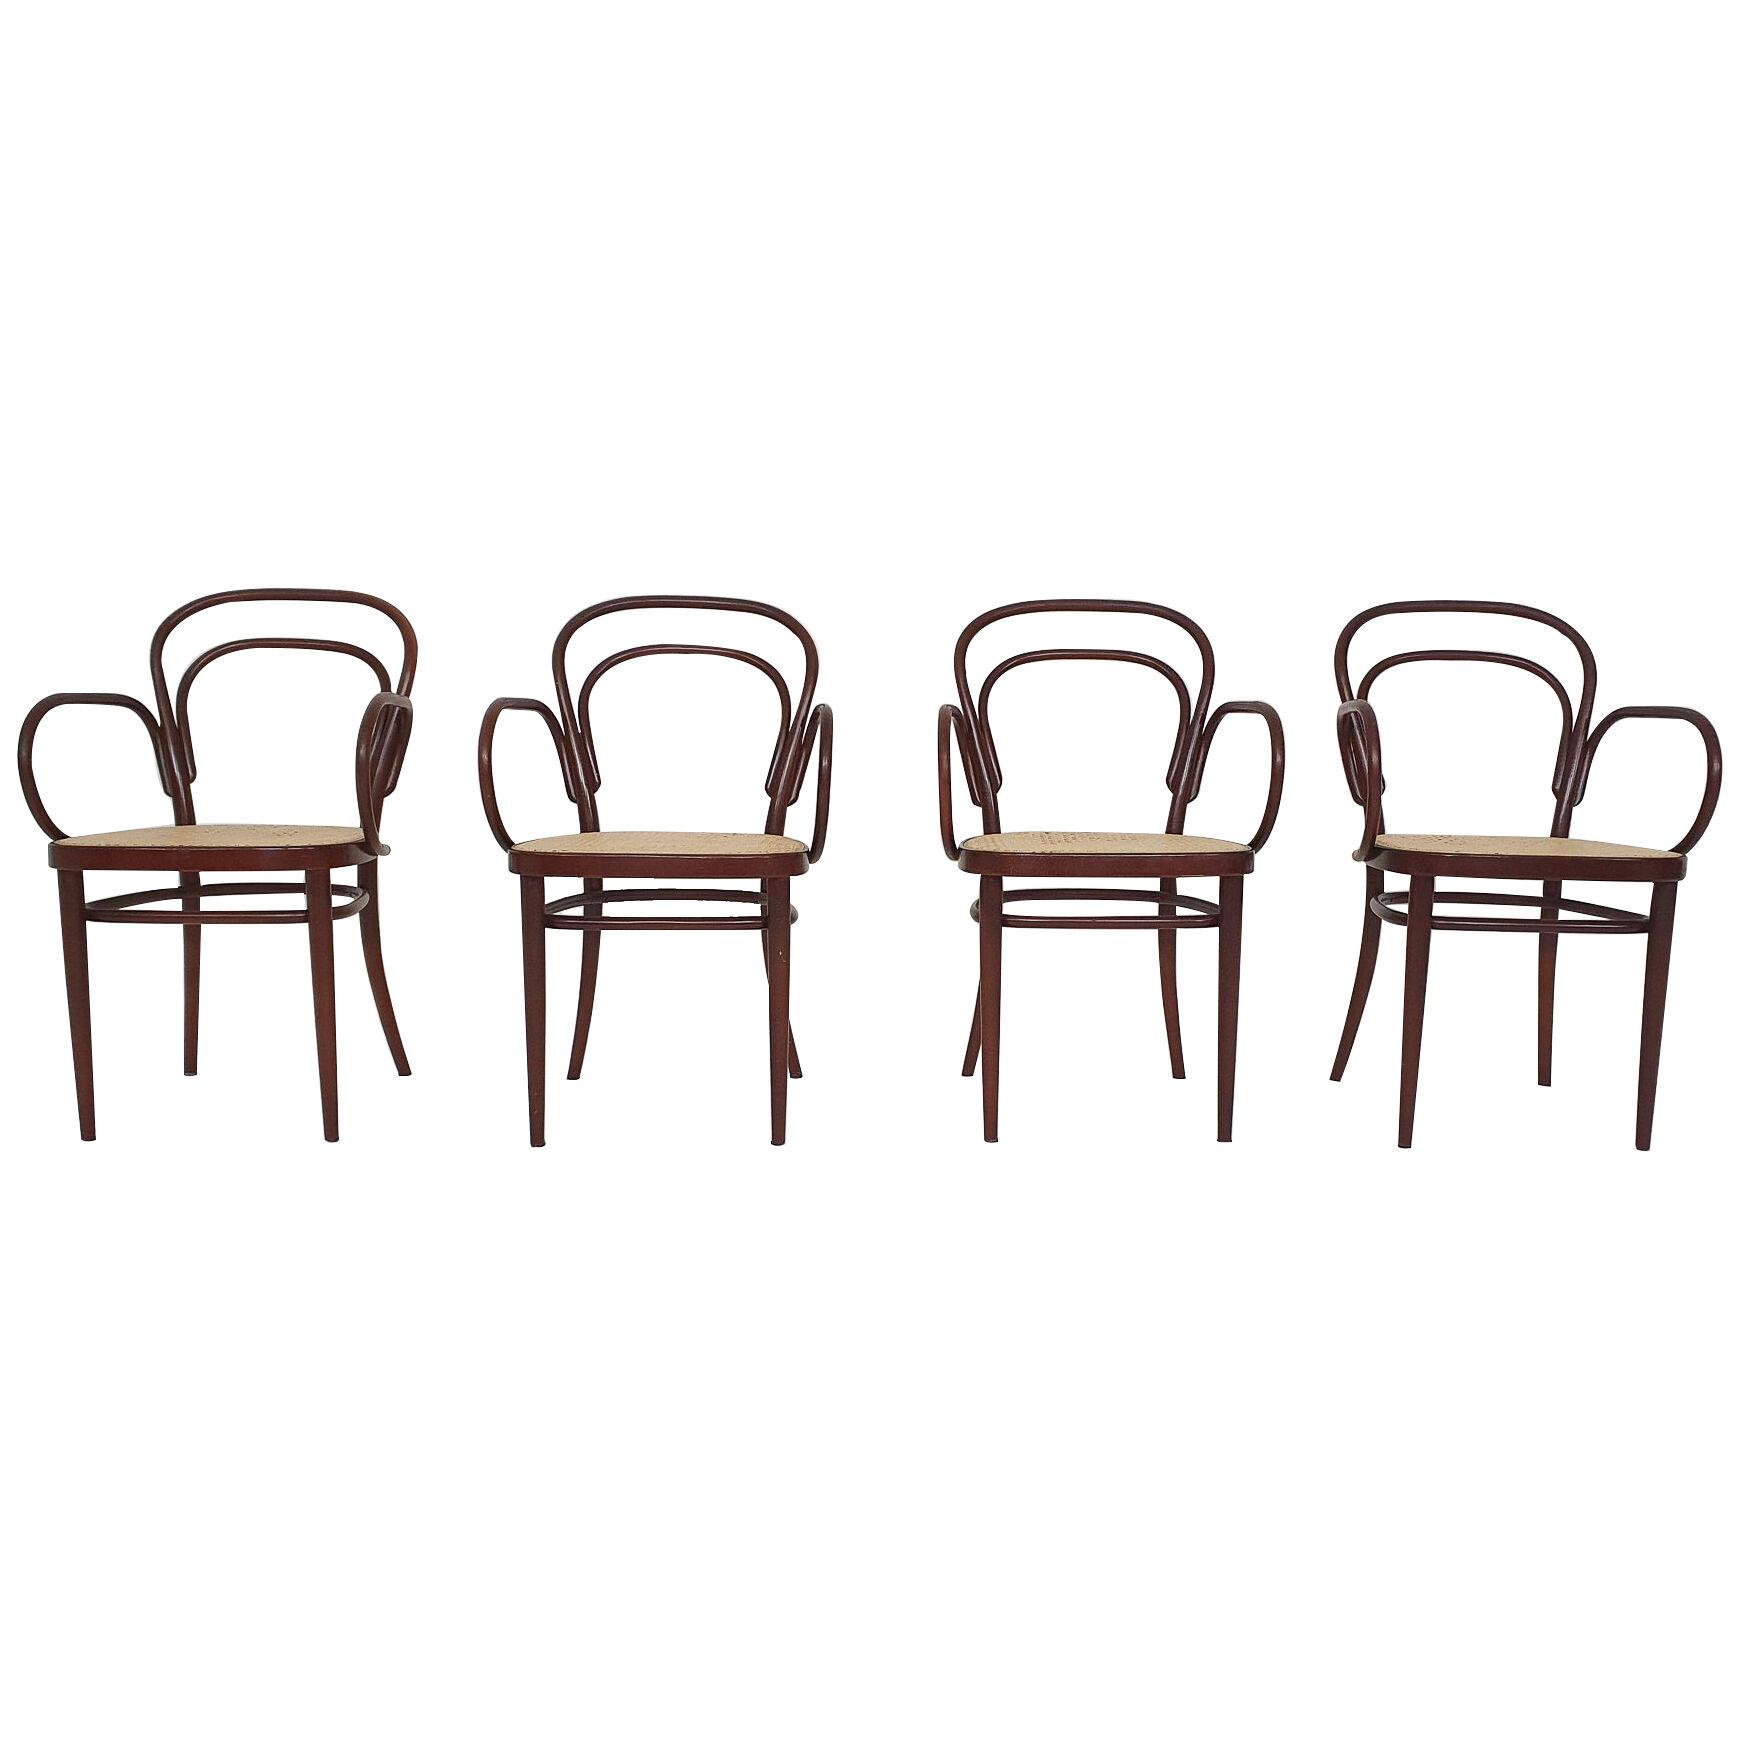 Set of 4 Thonet model 78 dining chairs with arm rests